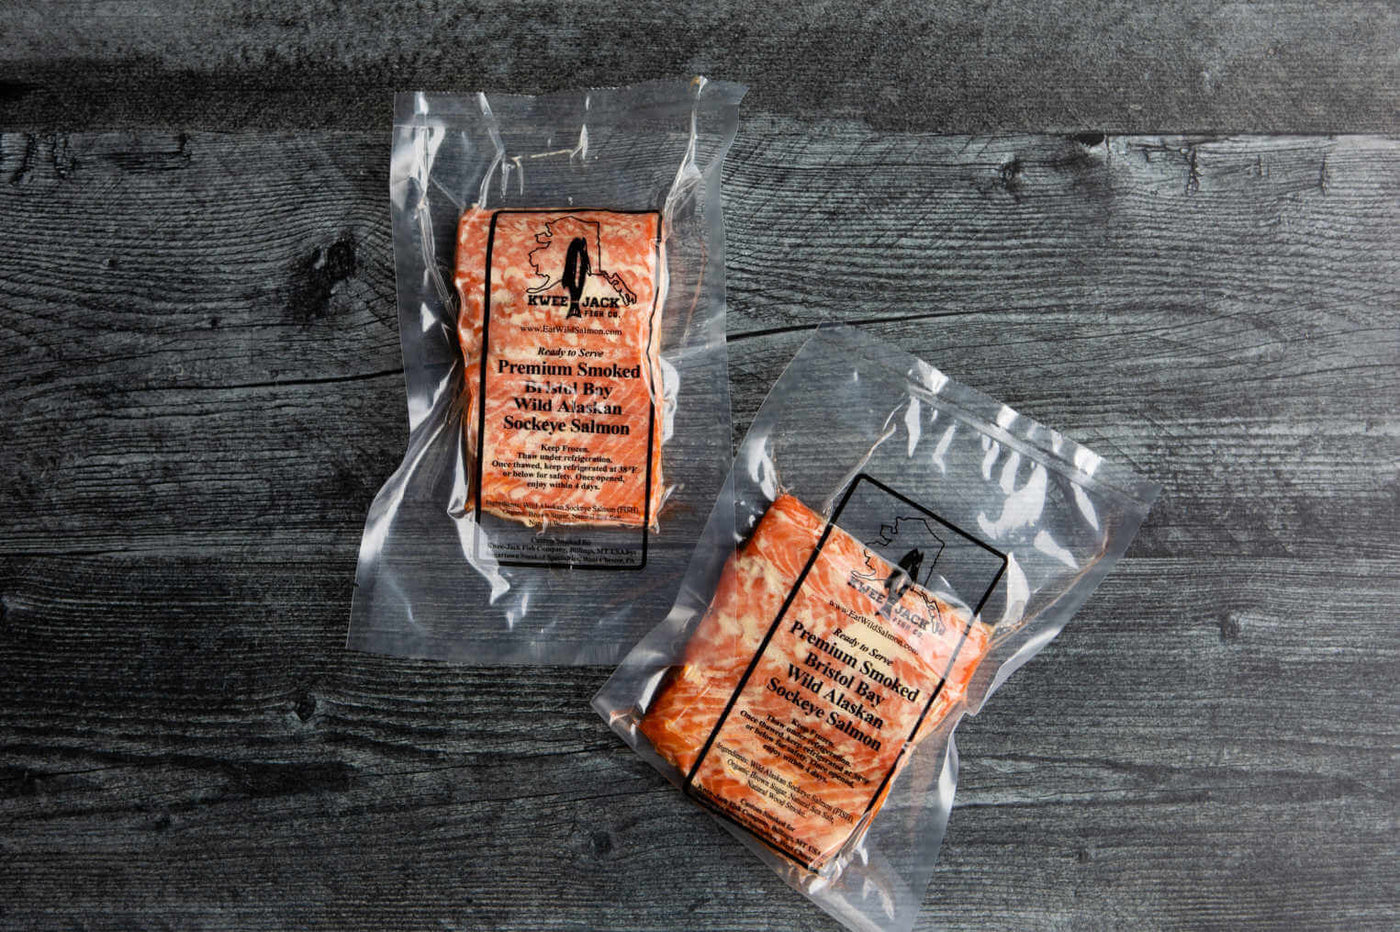 Kwee-Jack Fish Co. wild caught Alaskan traditional smoked salmon in vacuum-sealed pouches.